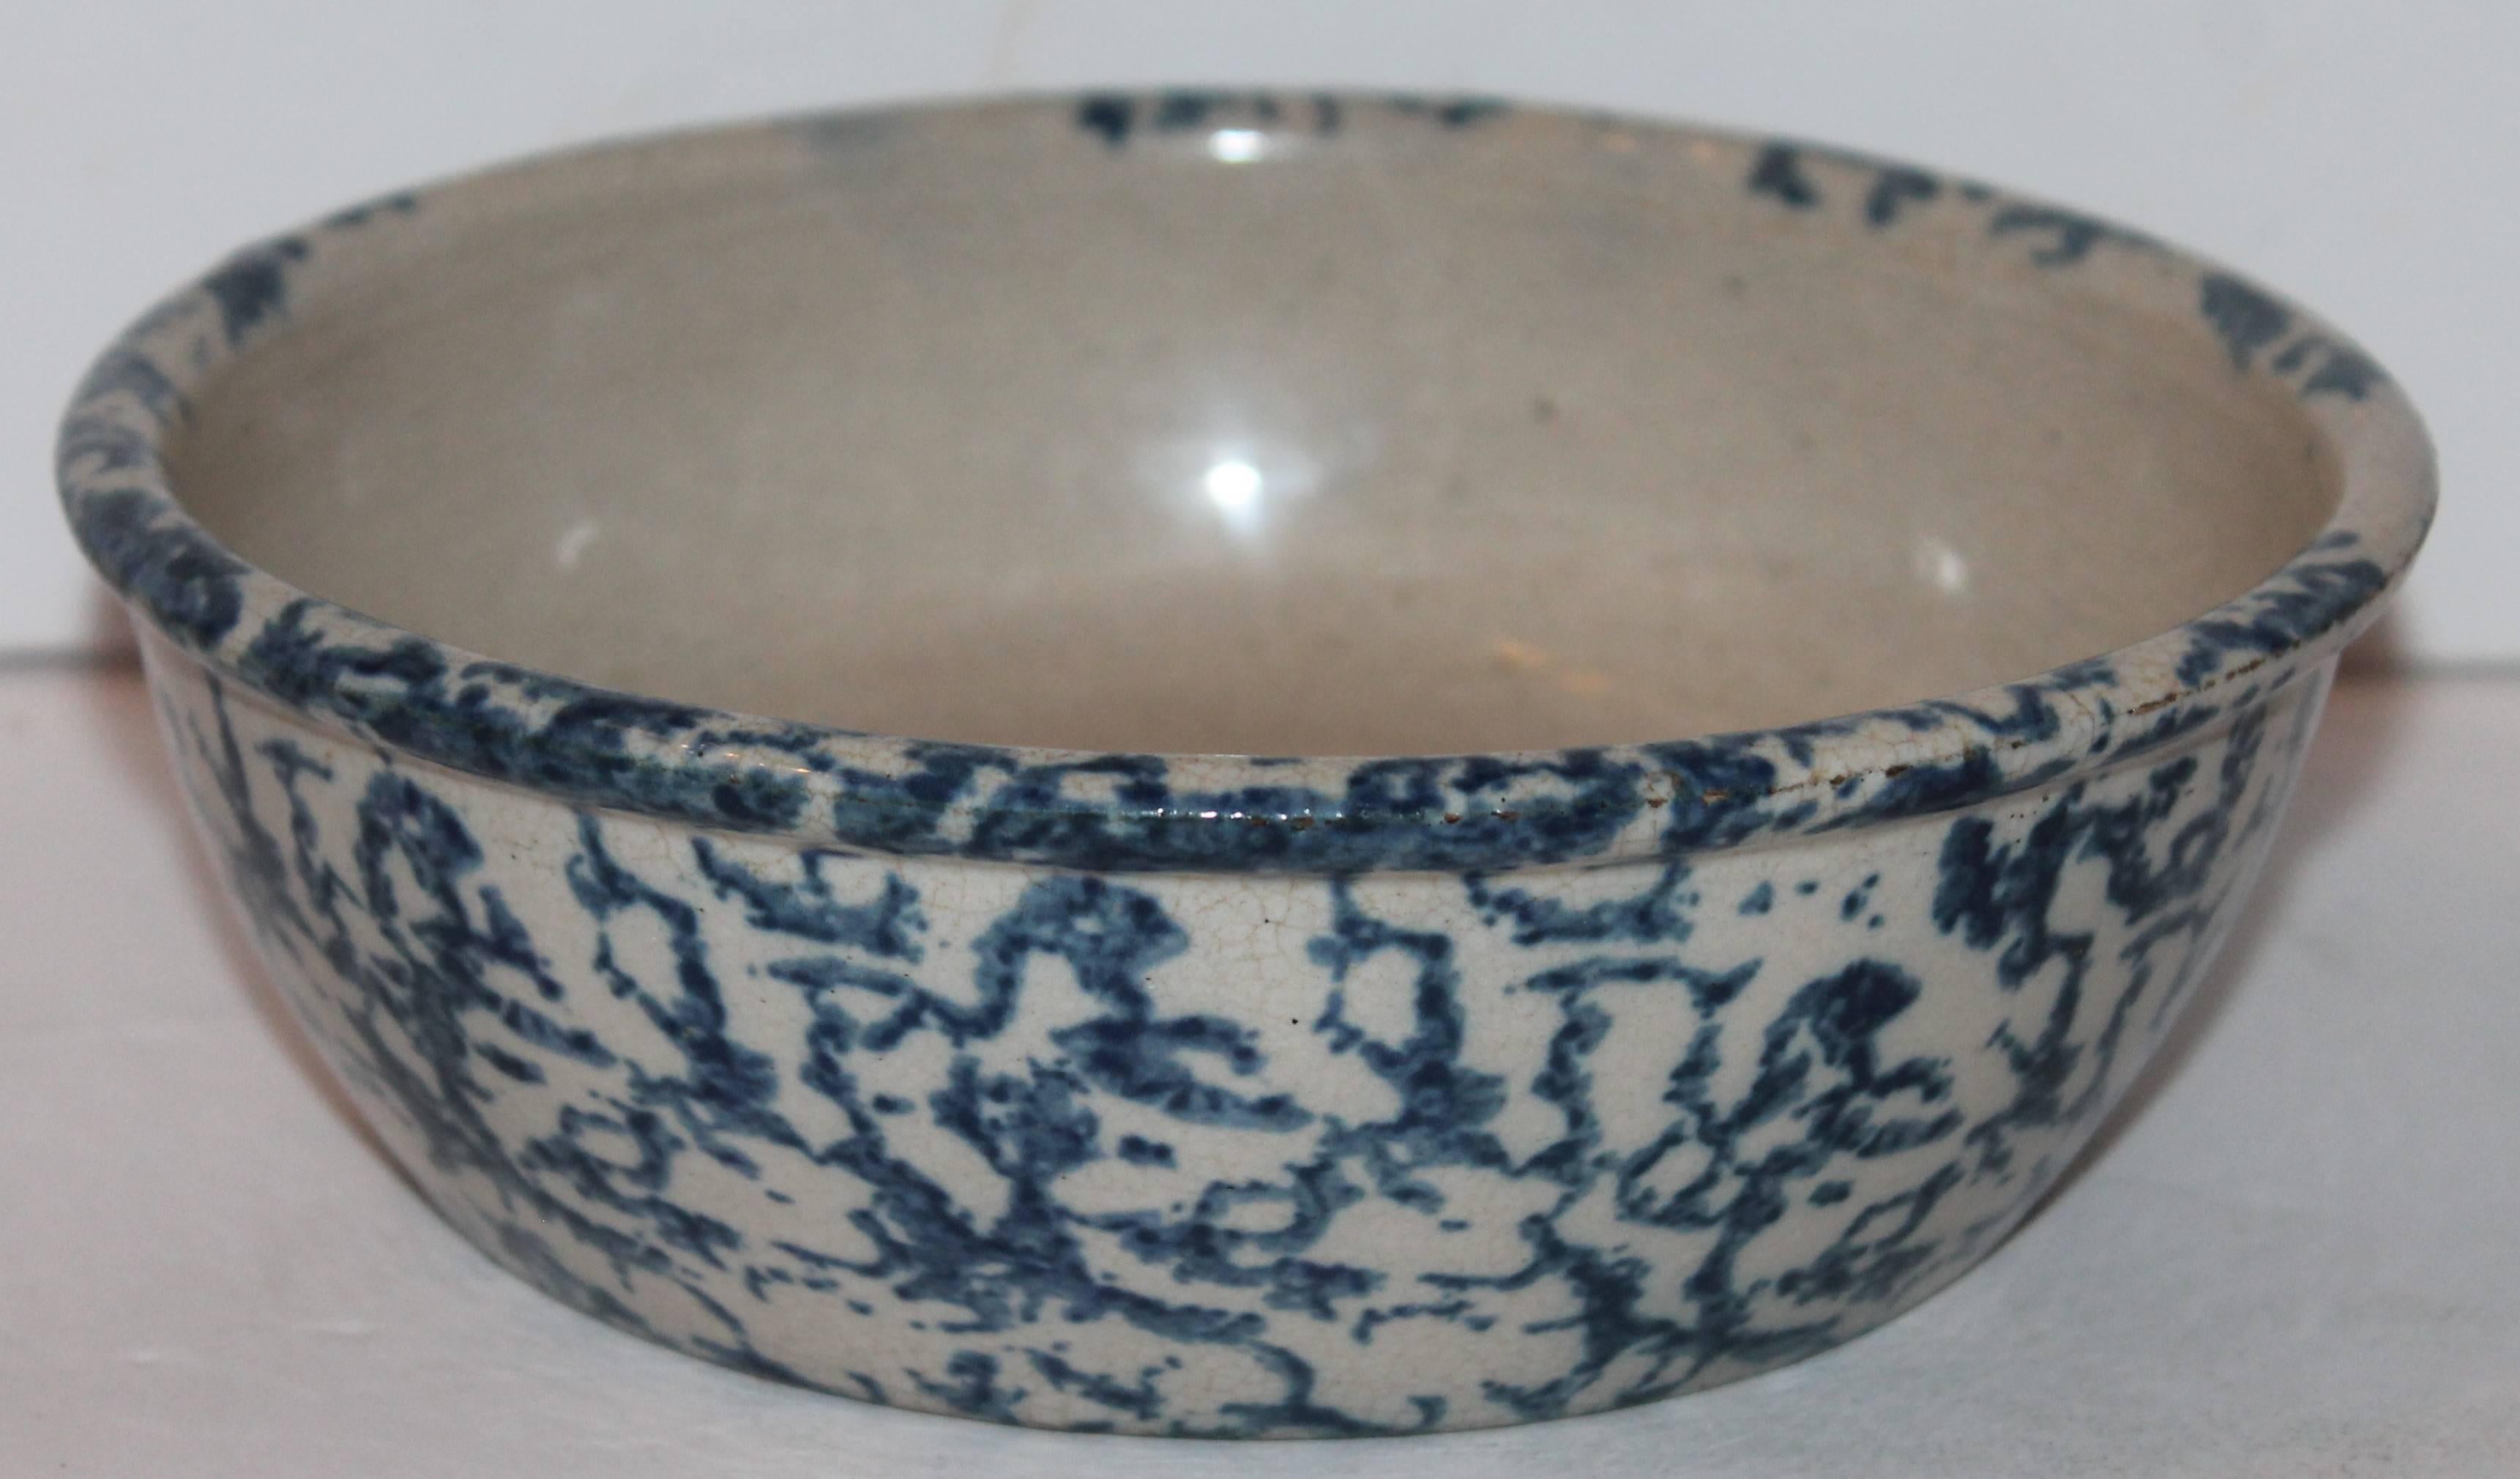 19th century sponge ware pottery bowl. The condition is very good. Great for serving berries or vegetables. Great size!